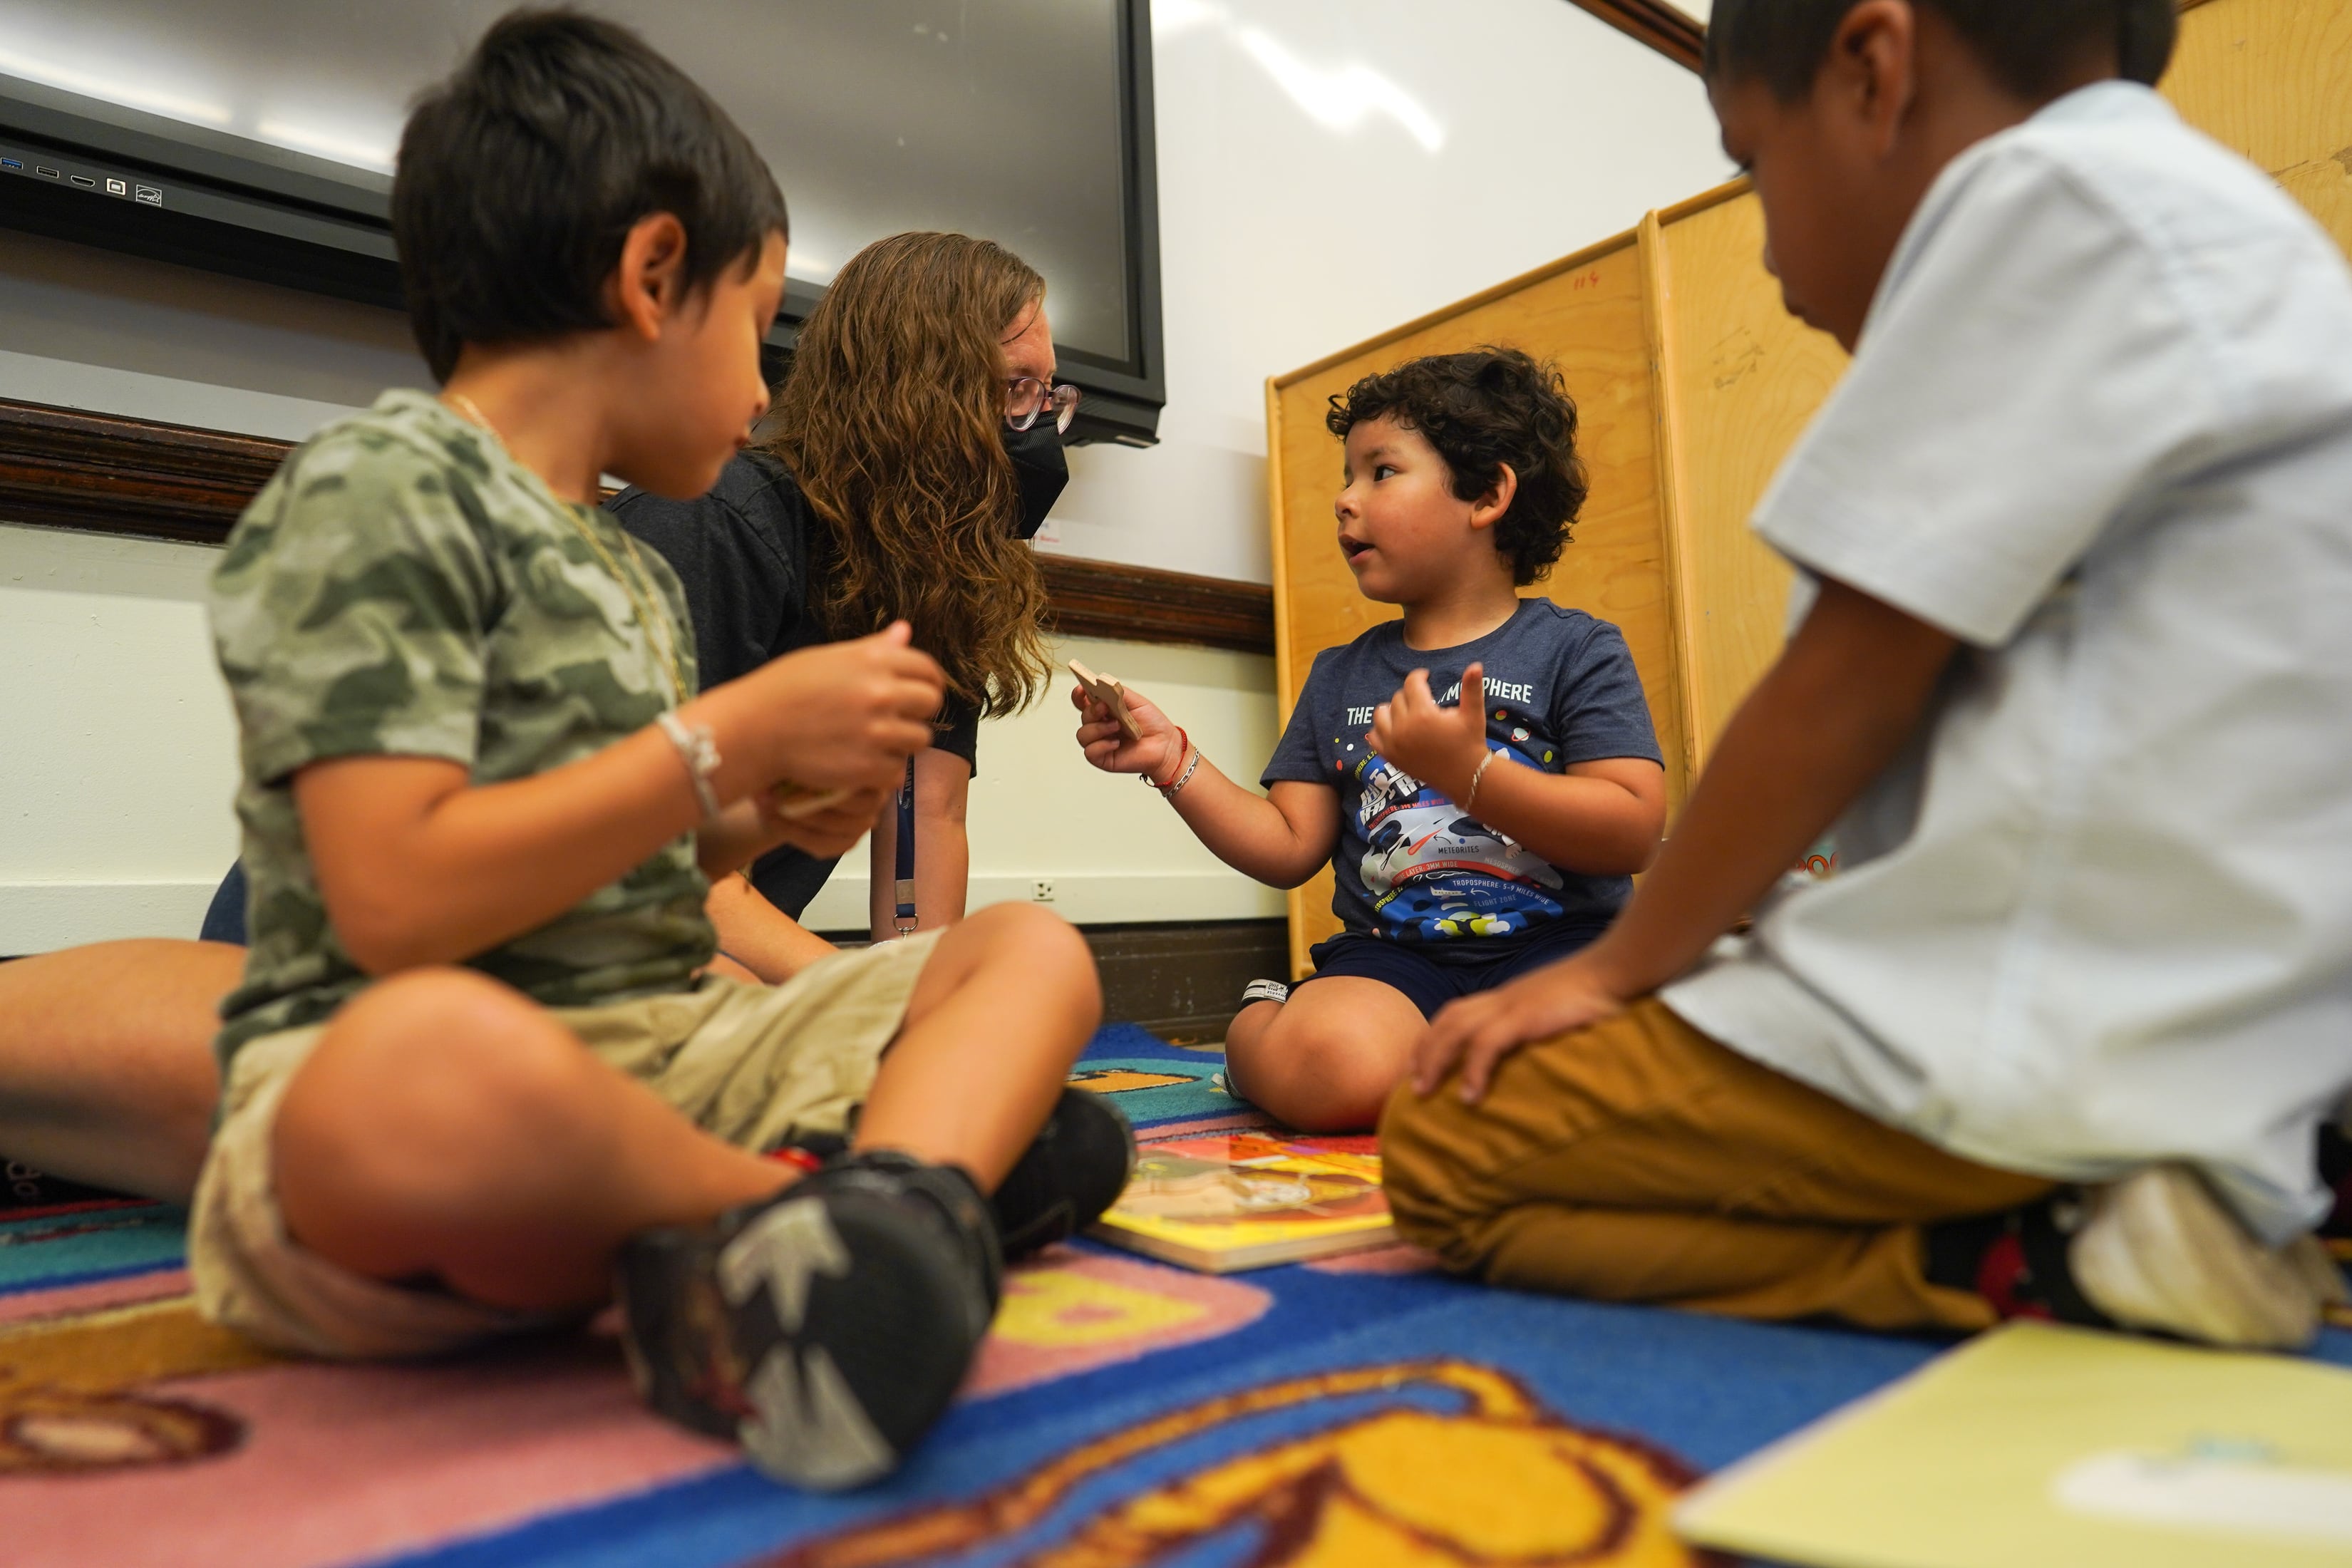 A woman teacher works with three young children on a multicolored rug in the classroom.